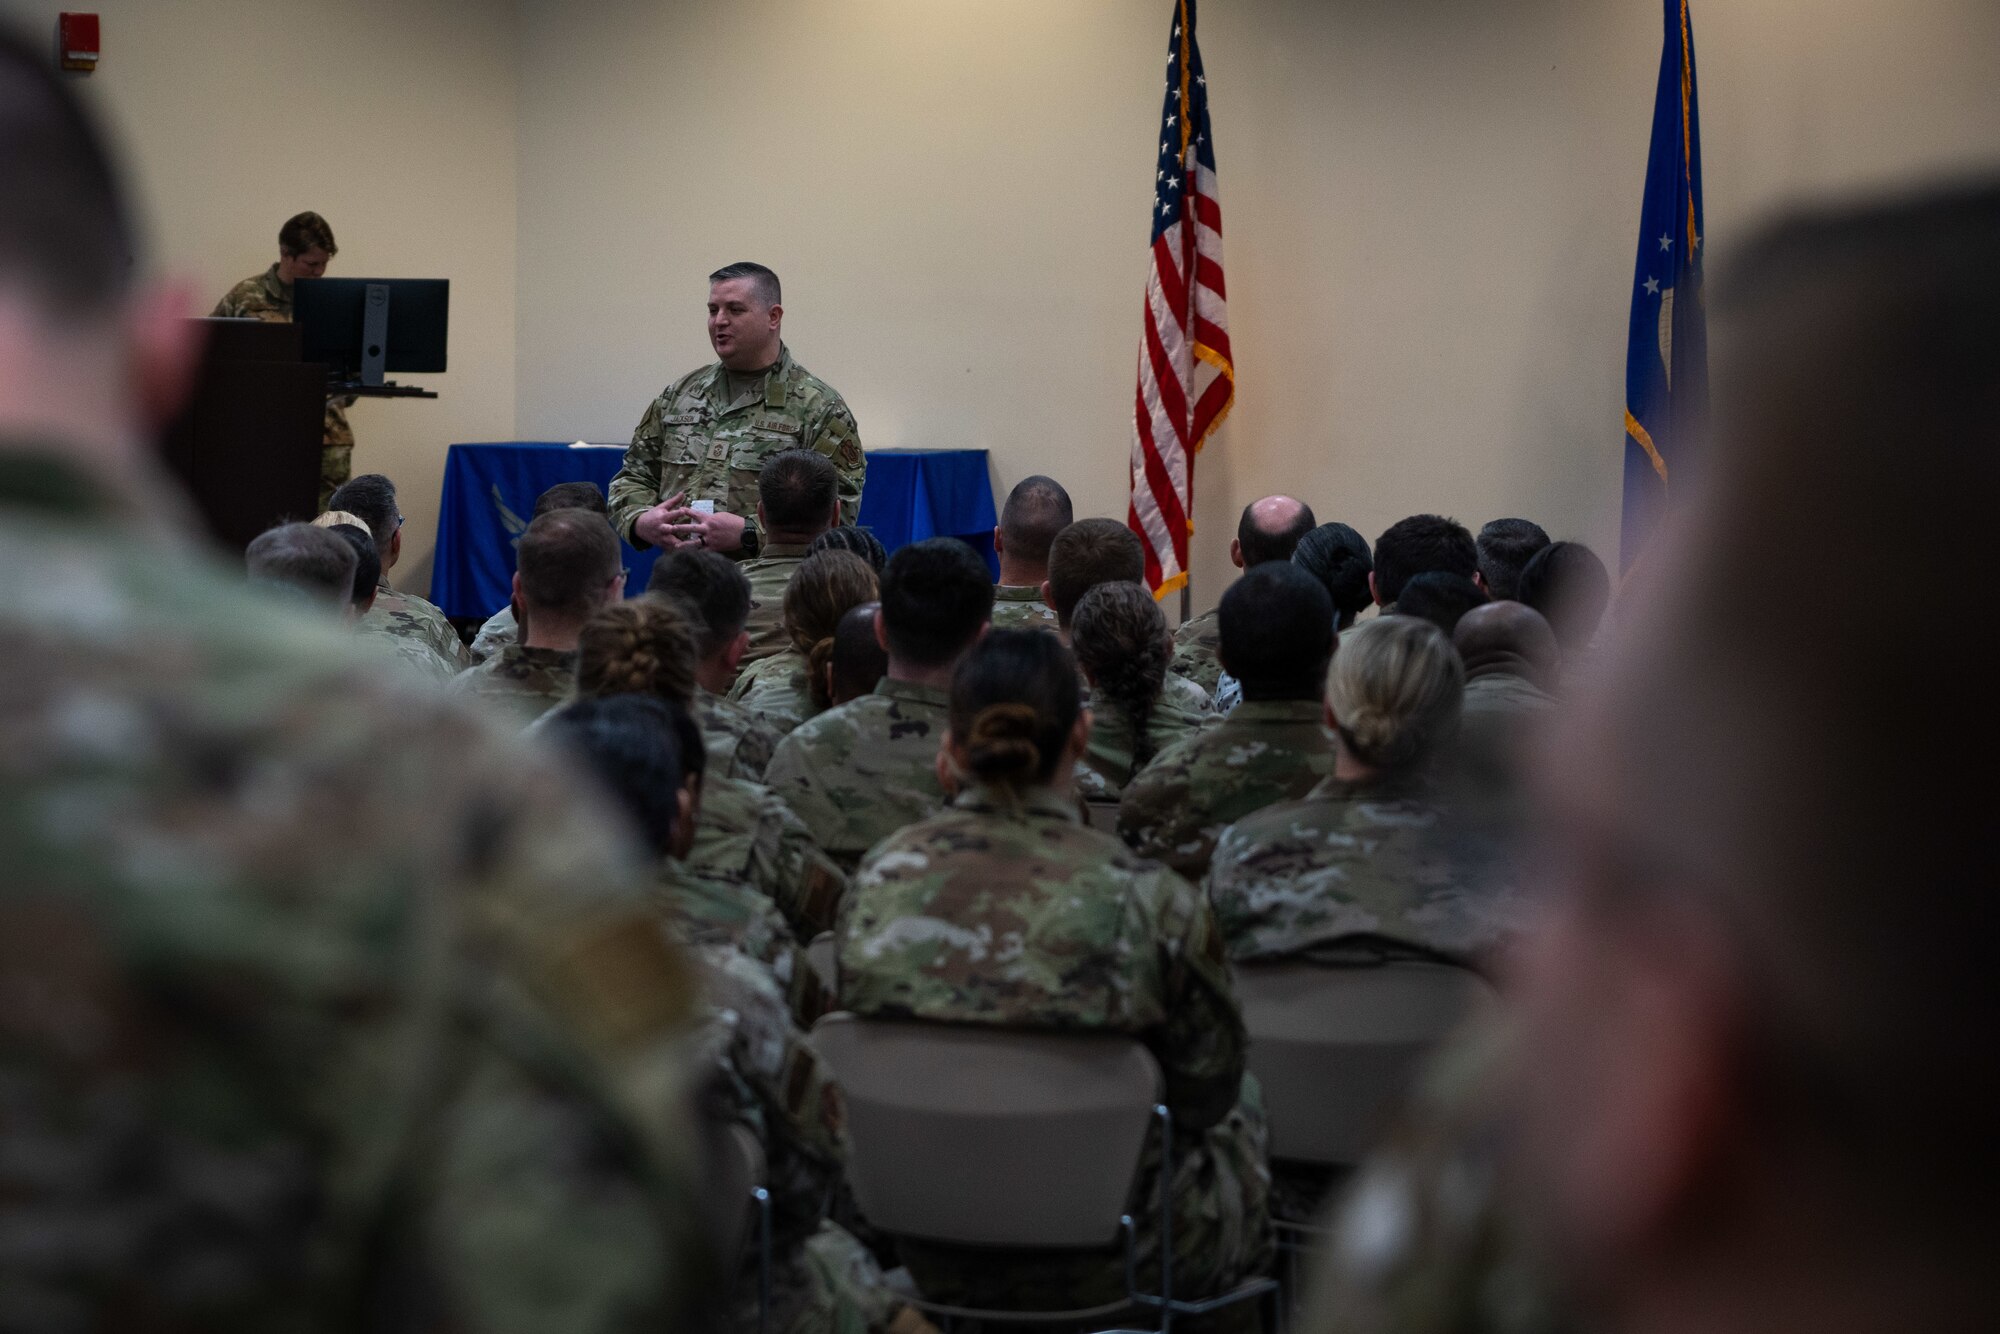 Command Chief stands in front of group of Airmen.